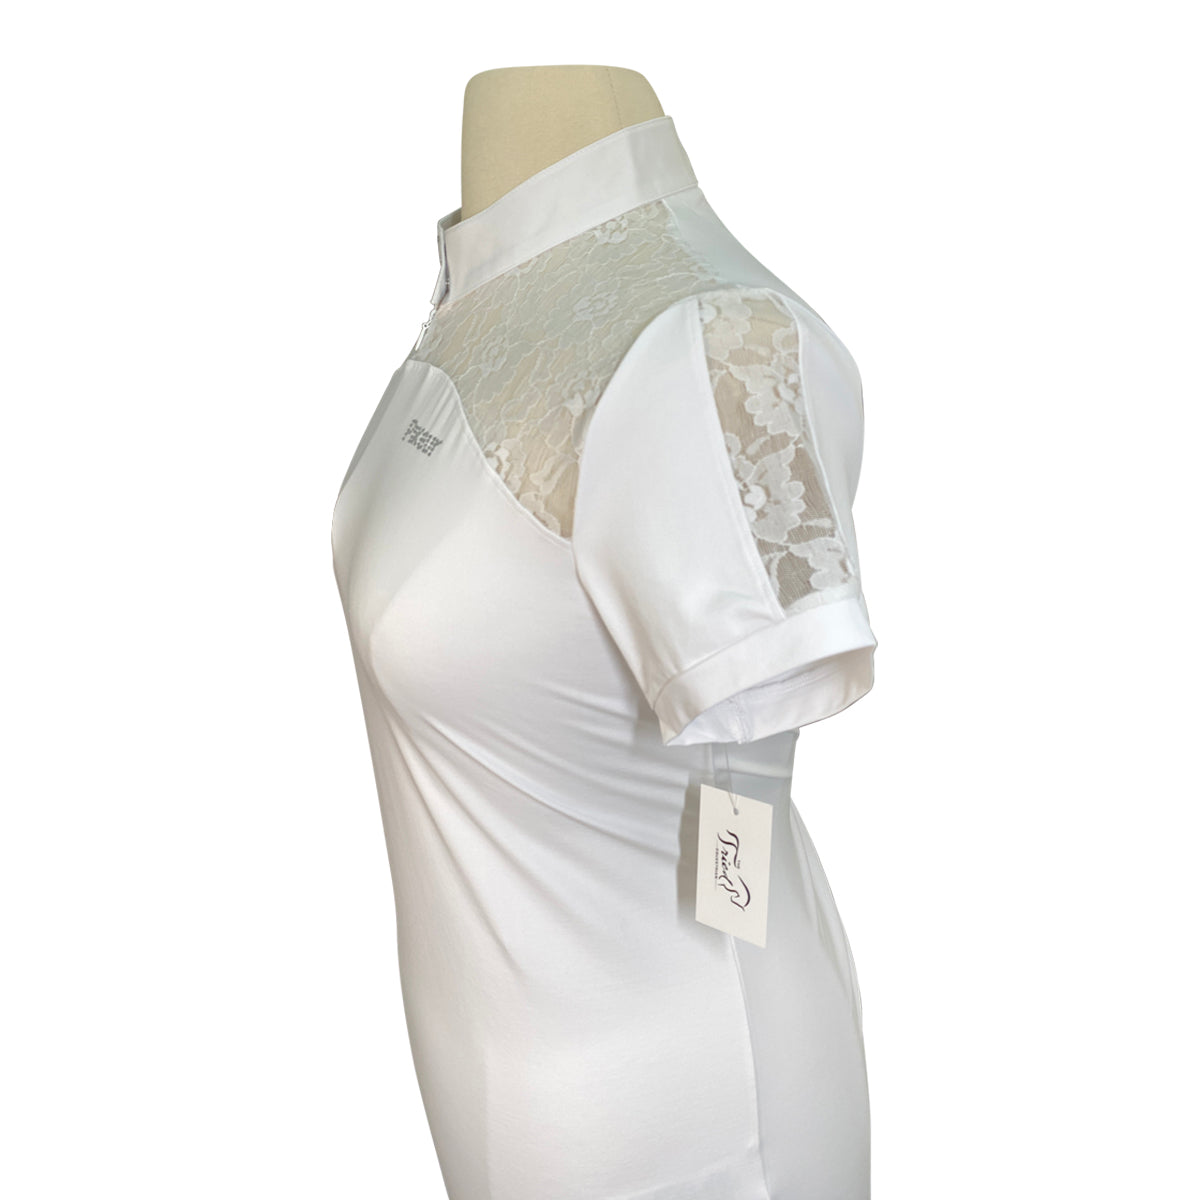 Pikeur &#39;Melenie&#39; Competition Shirt in White - Women&#39;s GE 46 (US XL)